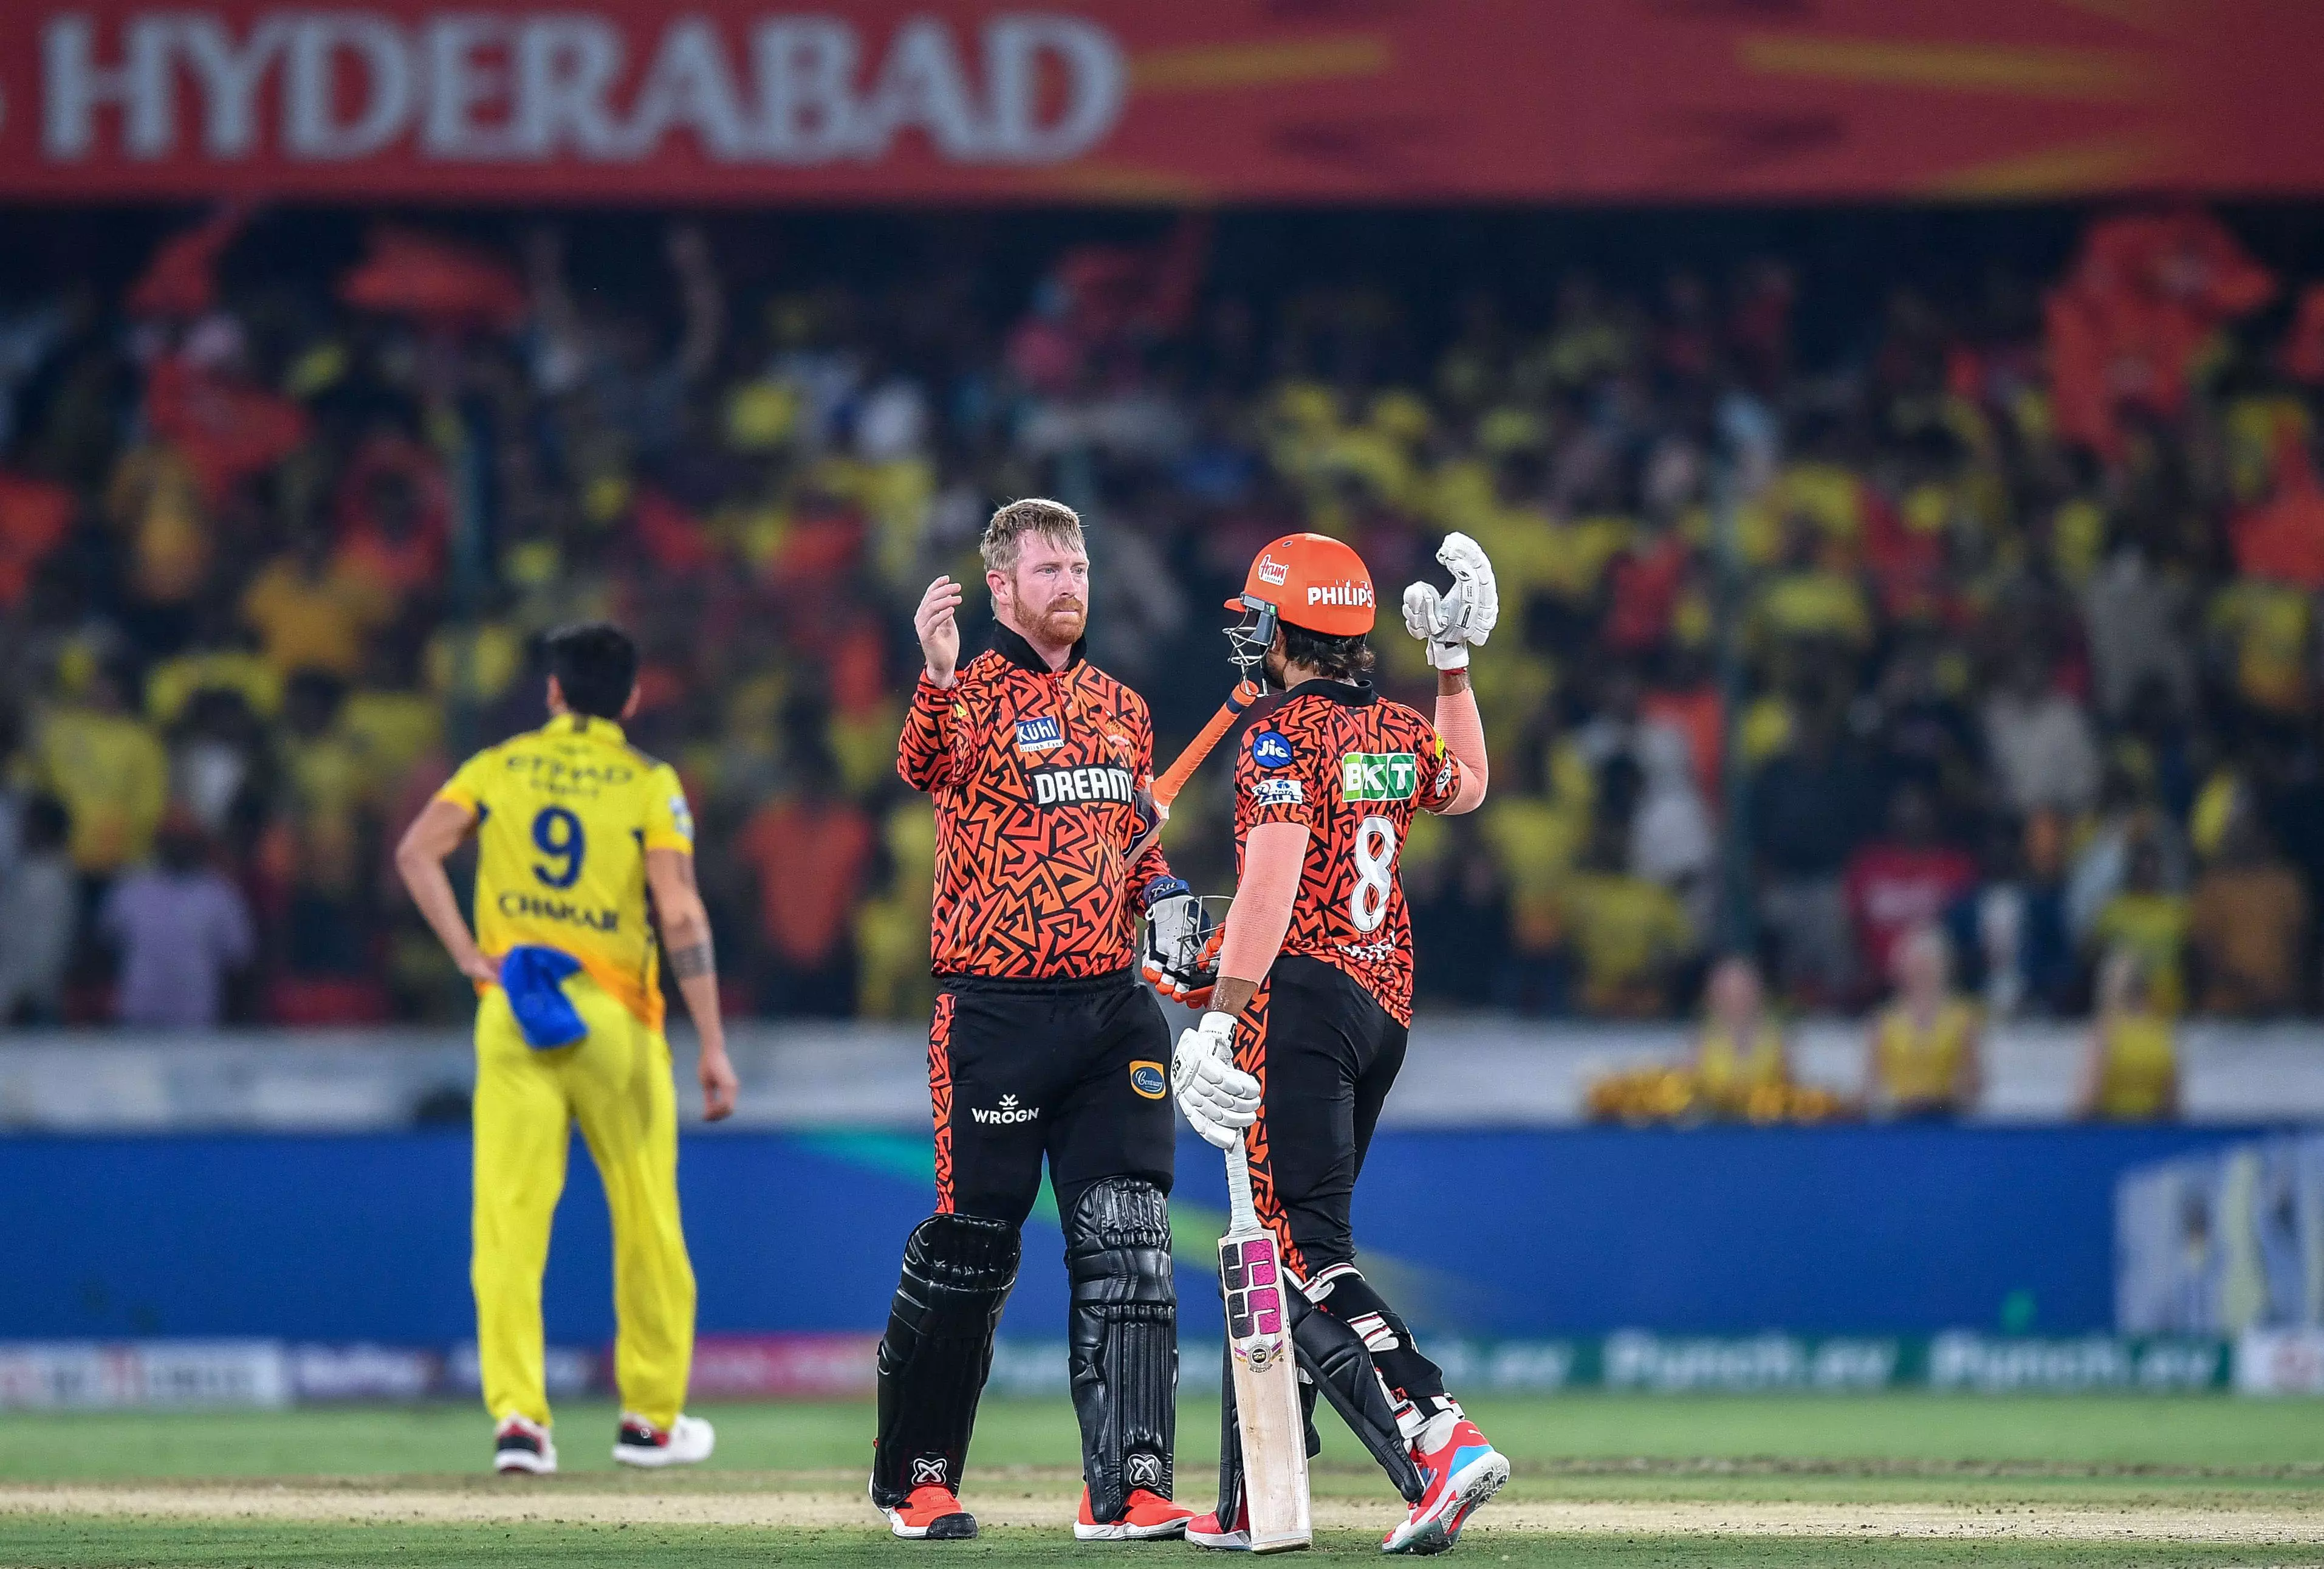 Red-hot Hyderabad outpunch Big Brother Chennai